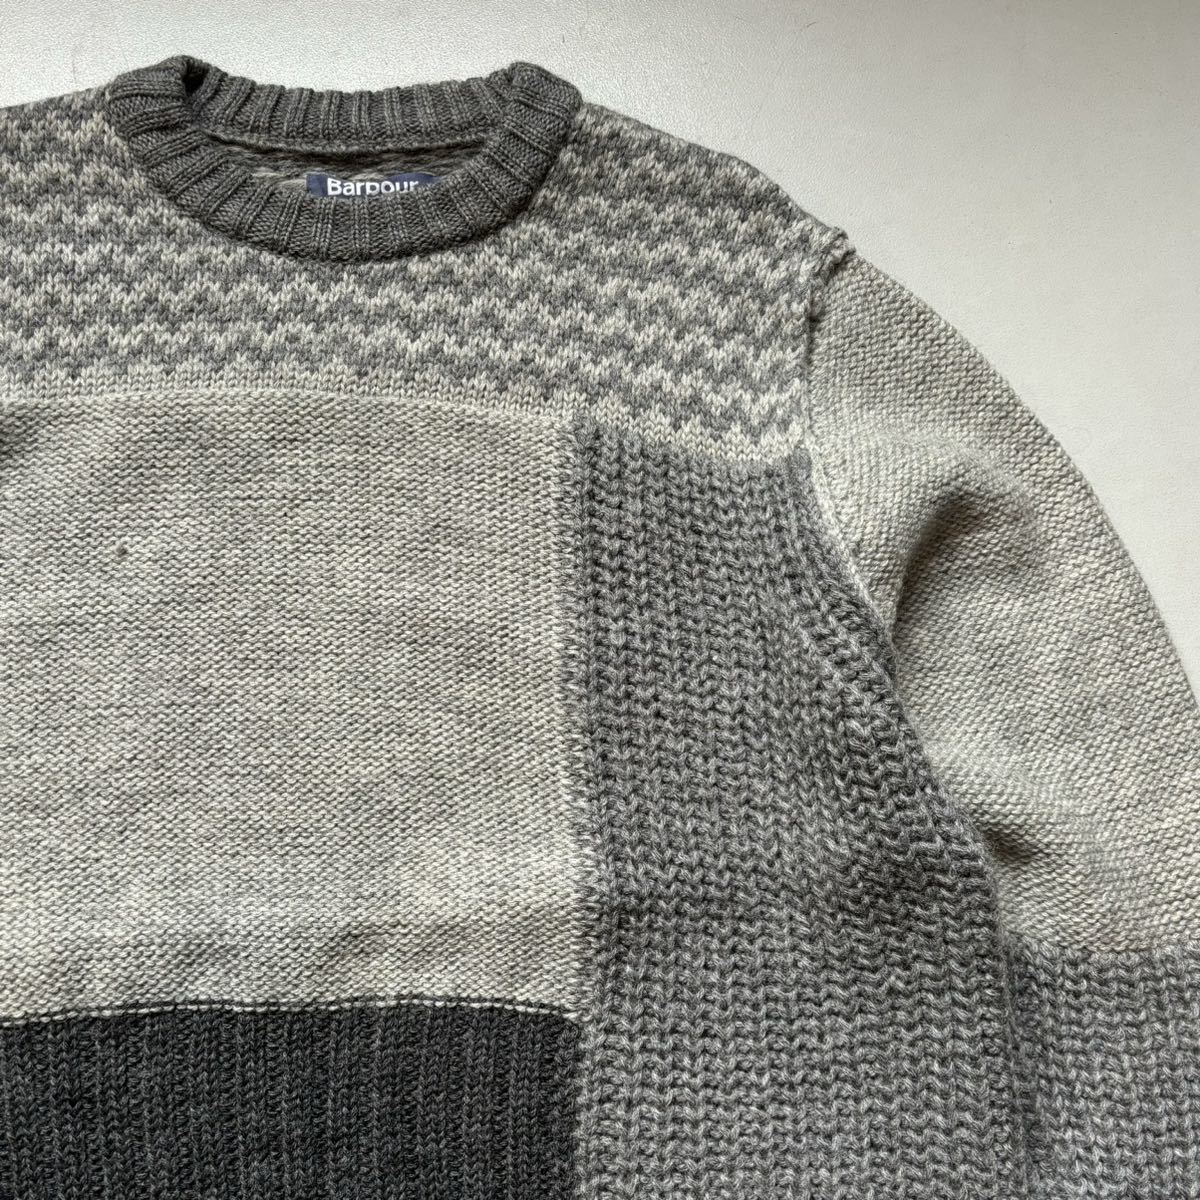 Barbour × White mountaineering patchwork knit sweater “size XL” バブアー×ホワイトマウンテニアリング パッチワークニットセーター